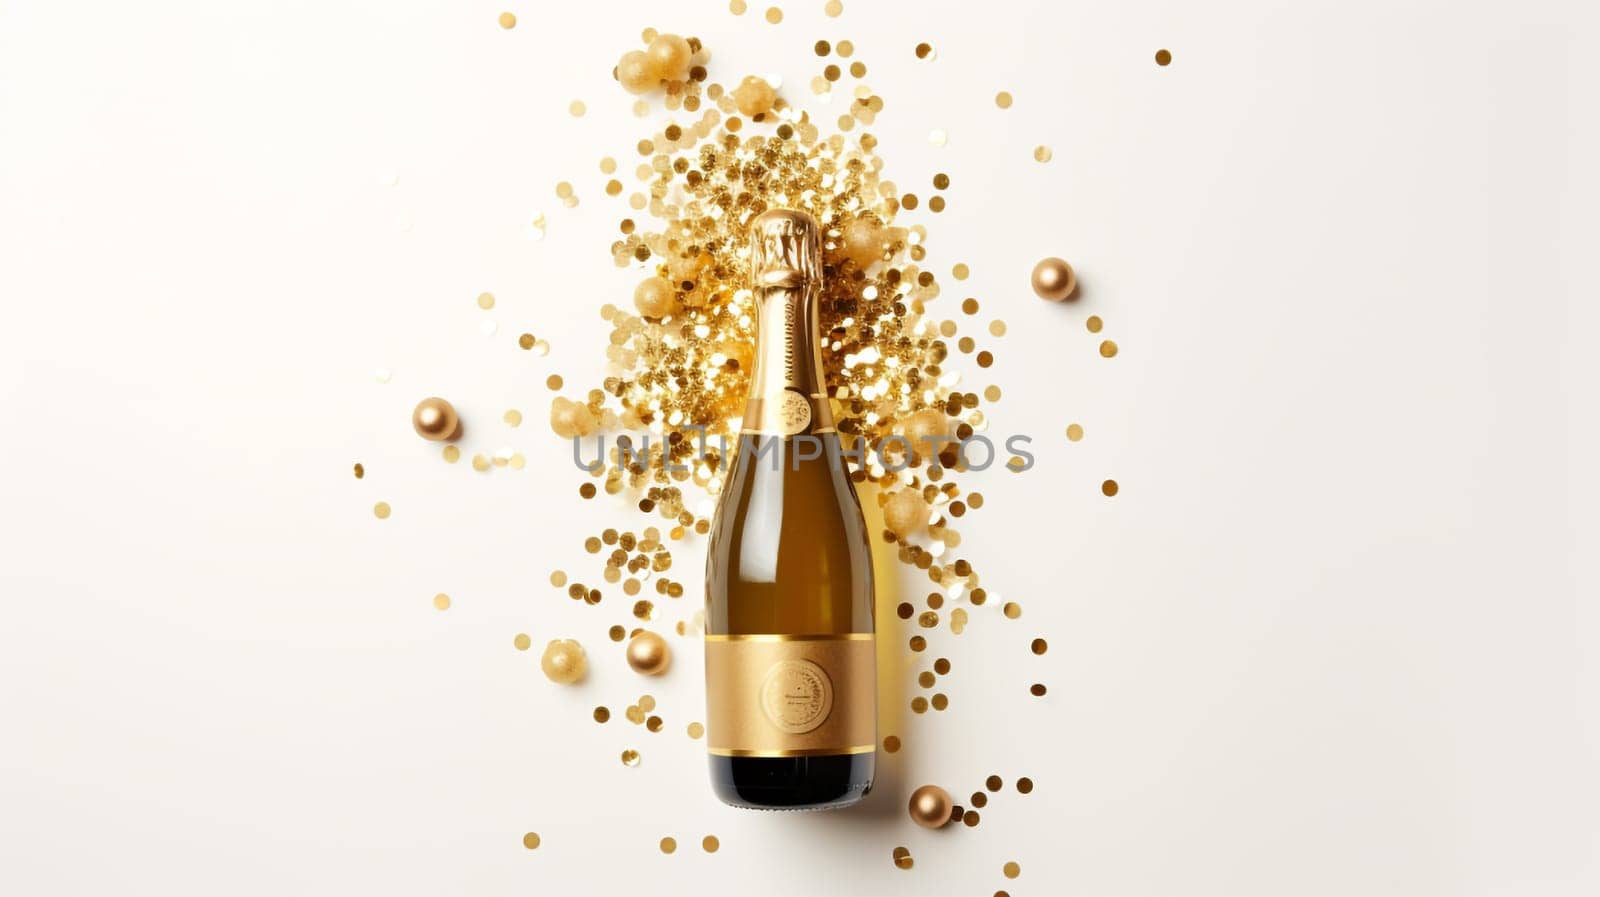 Top view of Champagne Bottle, Golden Confetti, and Decorative Balls on a Stylish light Background, Flat Lay Arrangement. with copy space